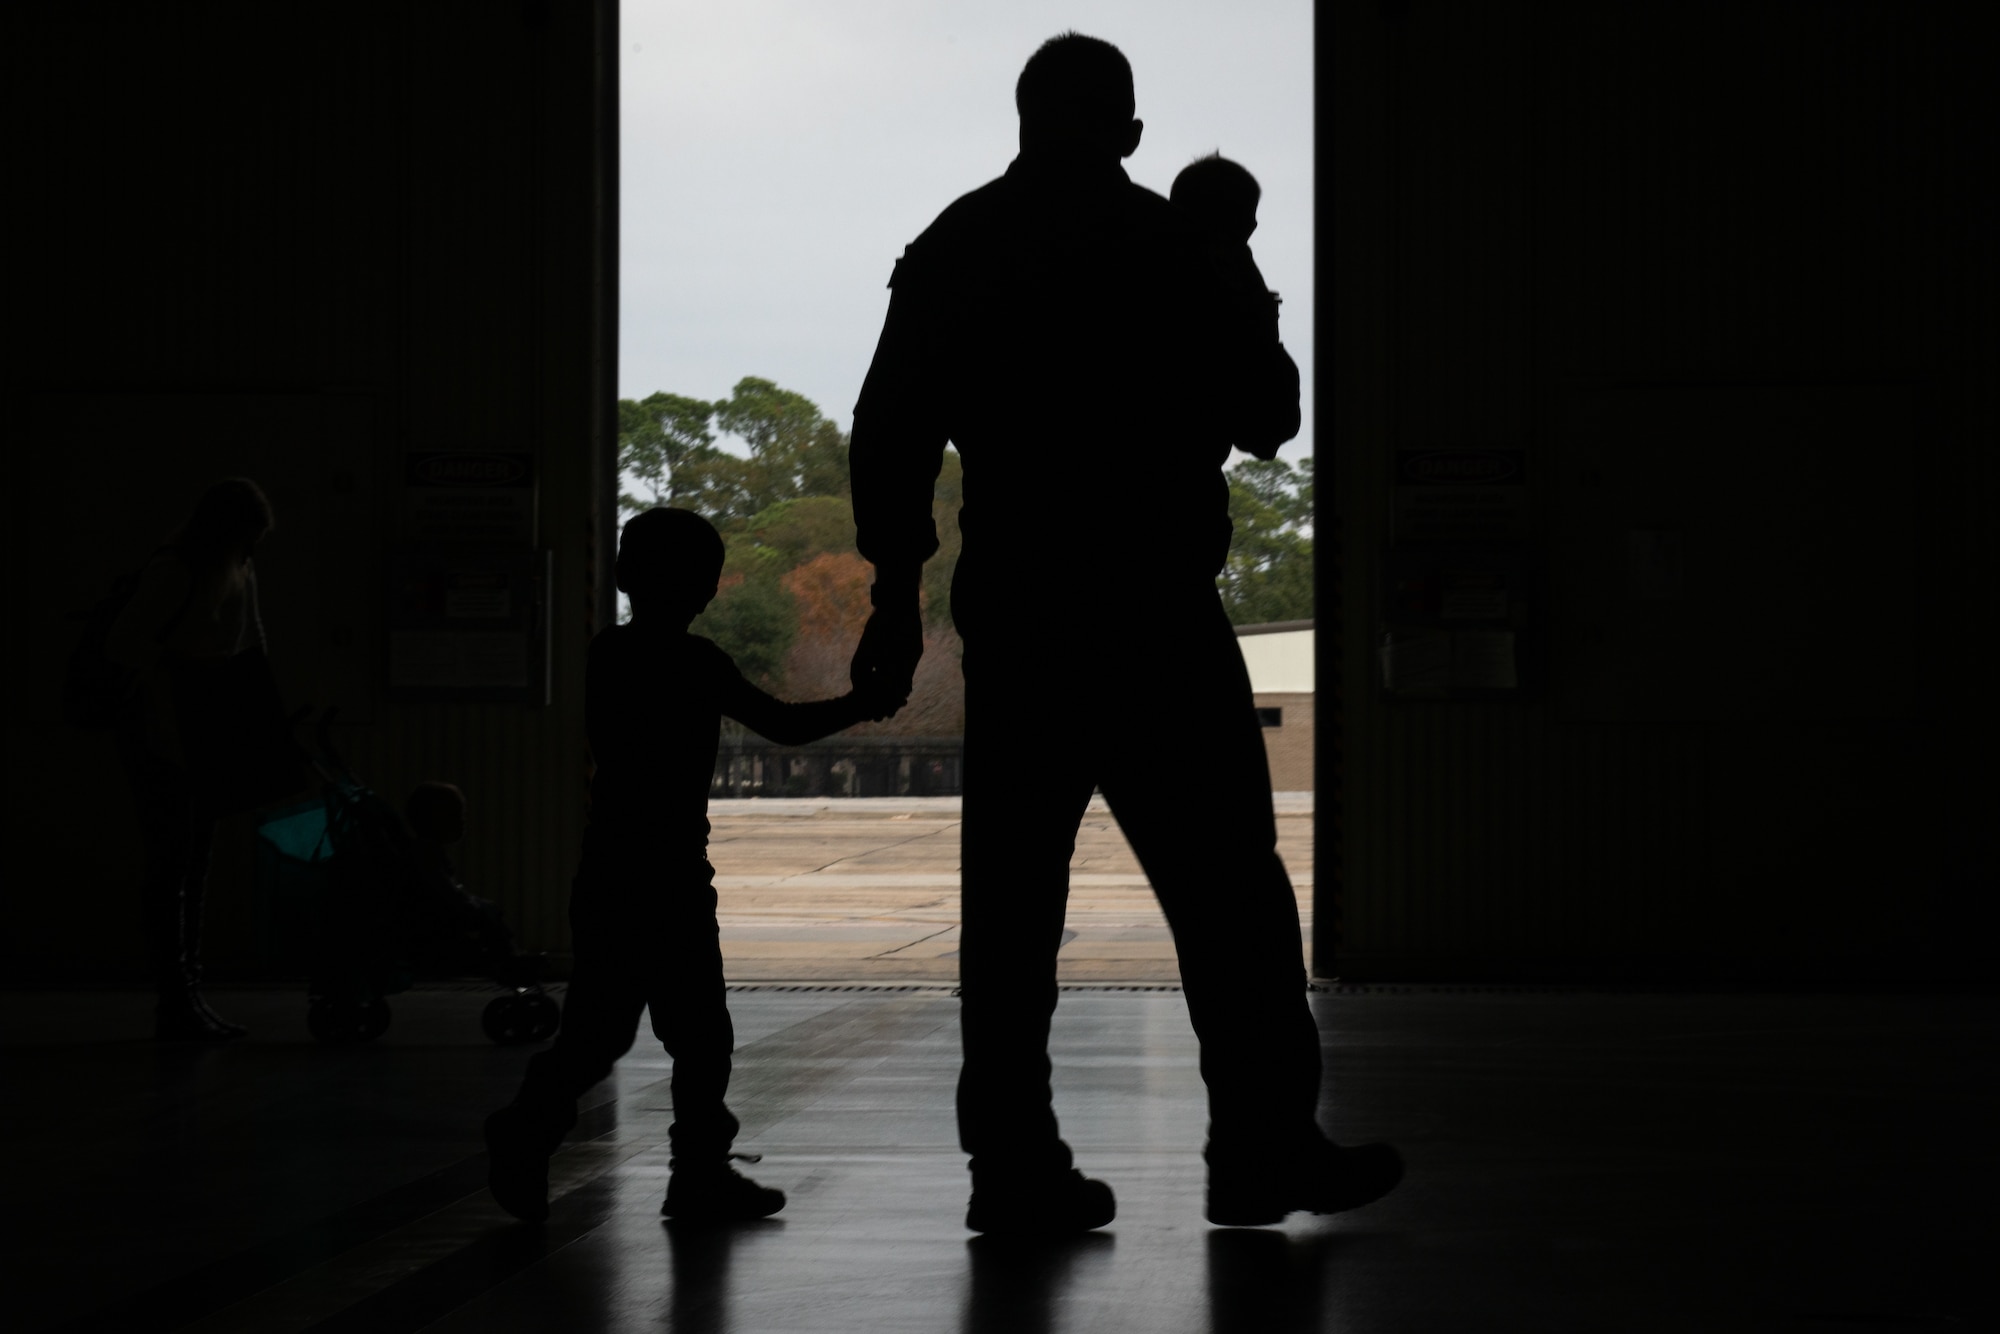 An Airman and holding their child, while holding the hand of another, are silhouetted in a hangar against the flightline background.